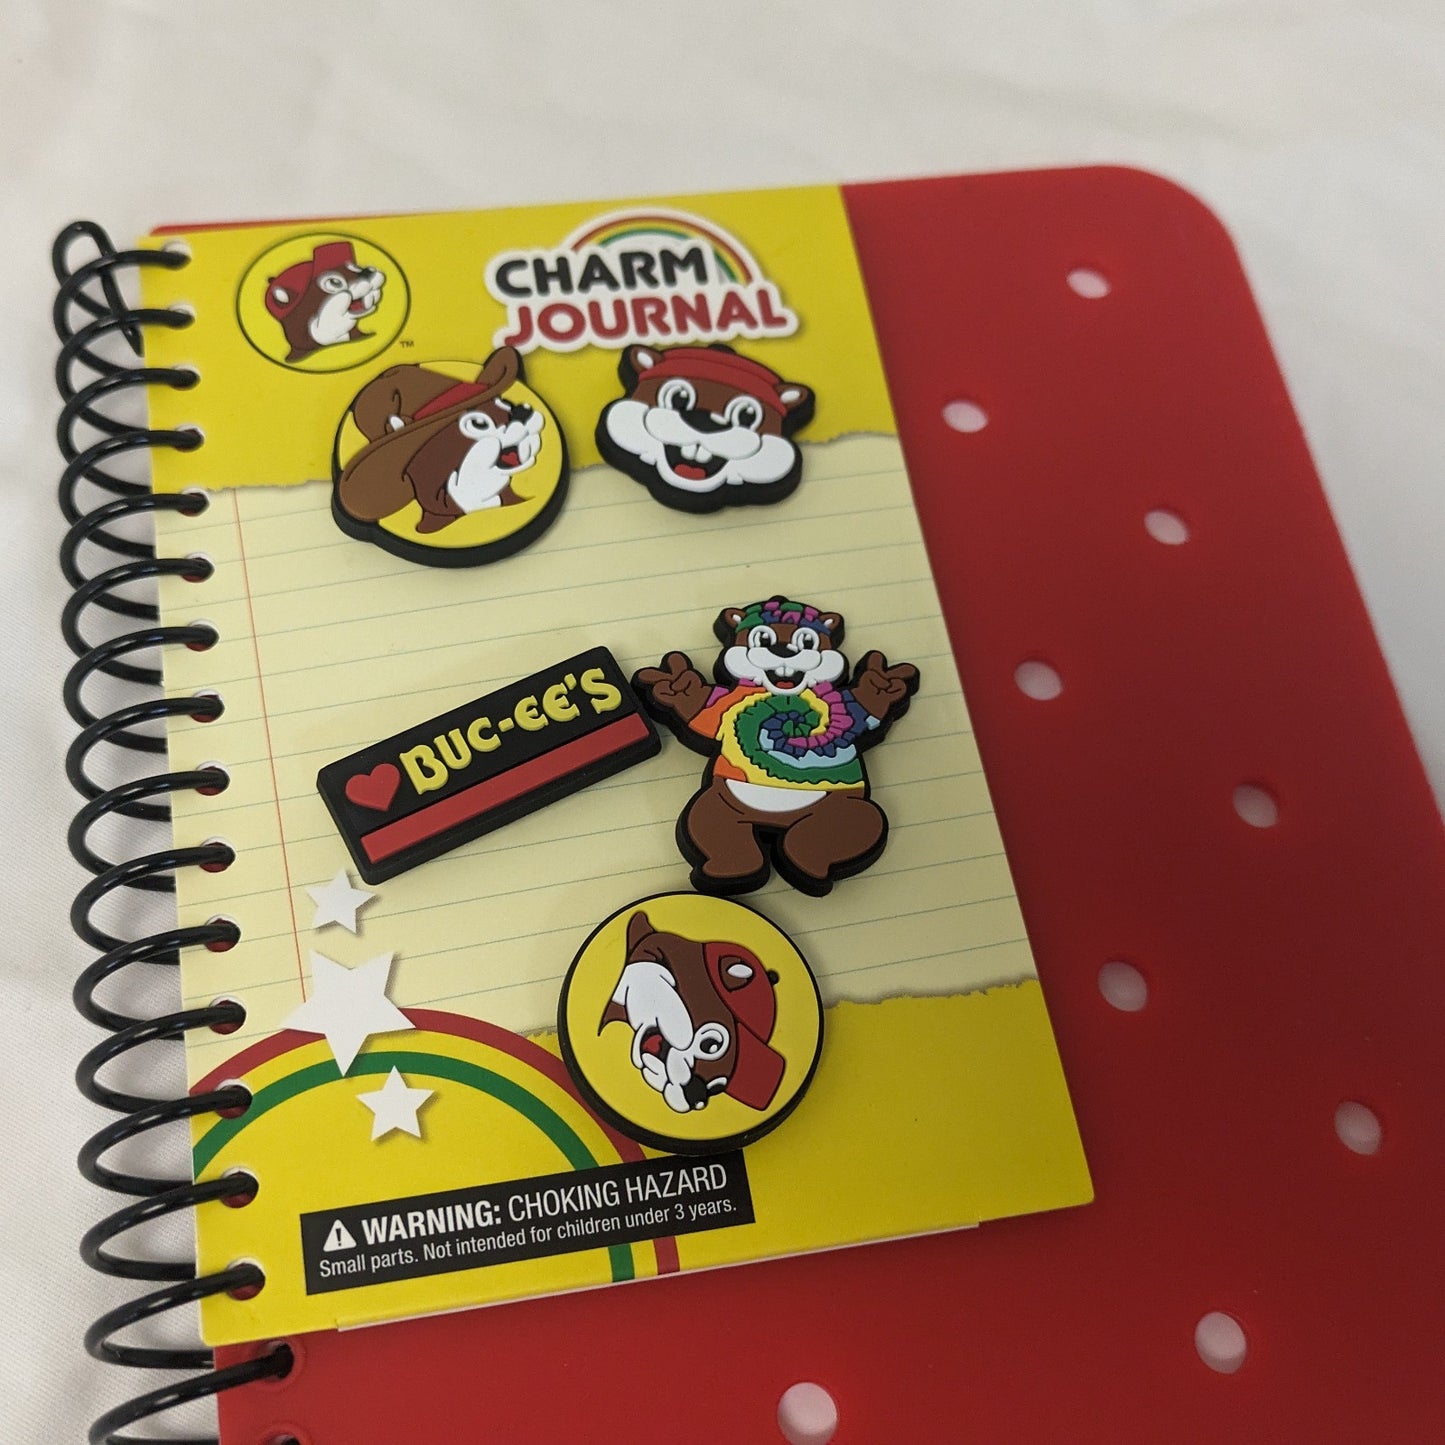 Buc-ee's Journal and Charms